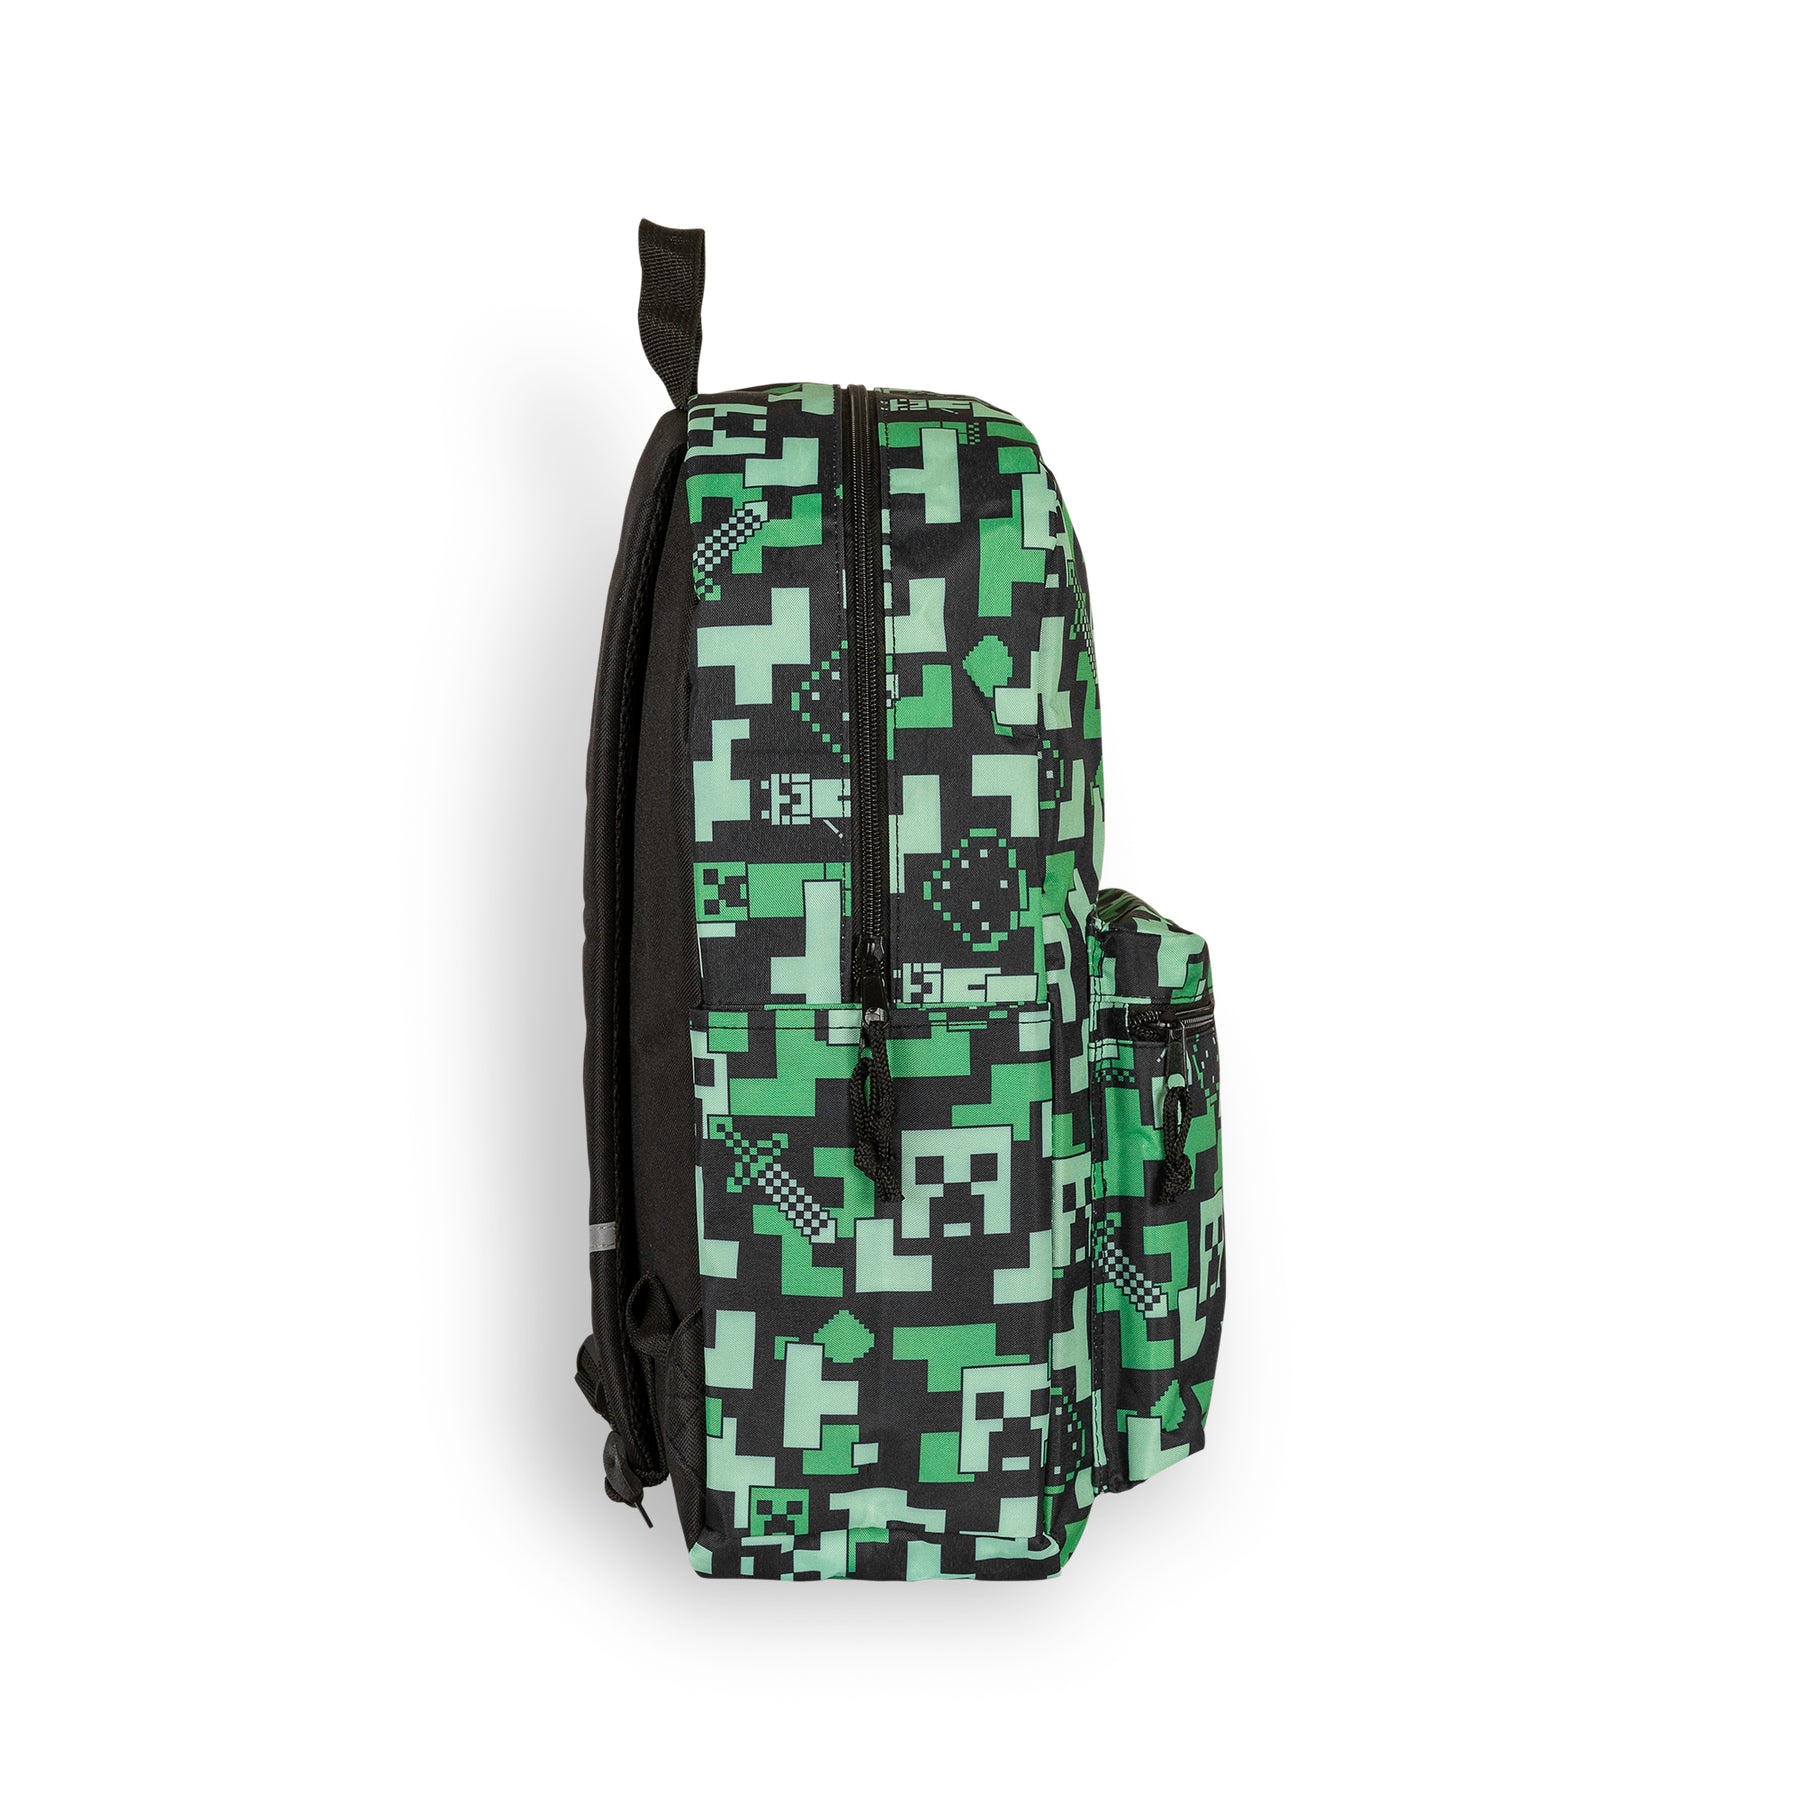 NEW - Godzilla Movie School Backpack with Small Pencil Bag